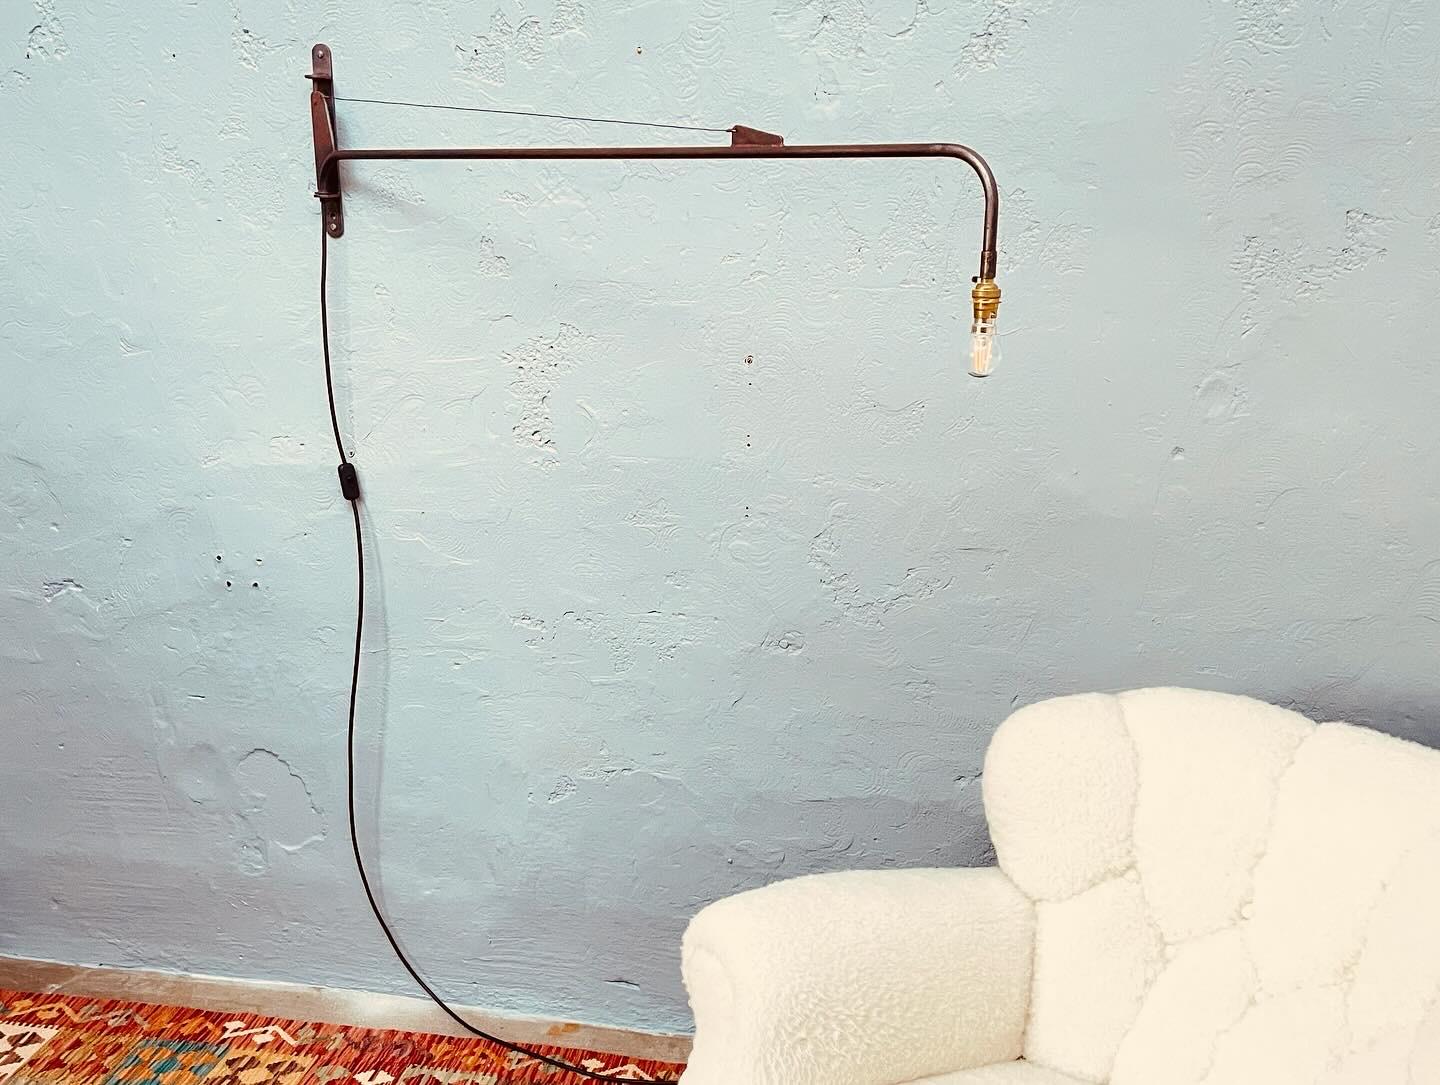 Iconic French industrial work lamp by Jean Prouve. 
With a beautiful dark age related wear and patina to the surfaces. 
Still with traces of the original paint. 
Rewired and fitted with an inline on/off switch. 
Still maintained the original brass